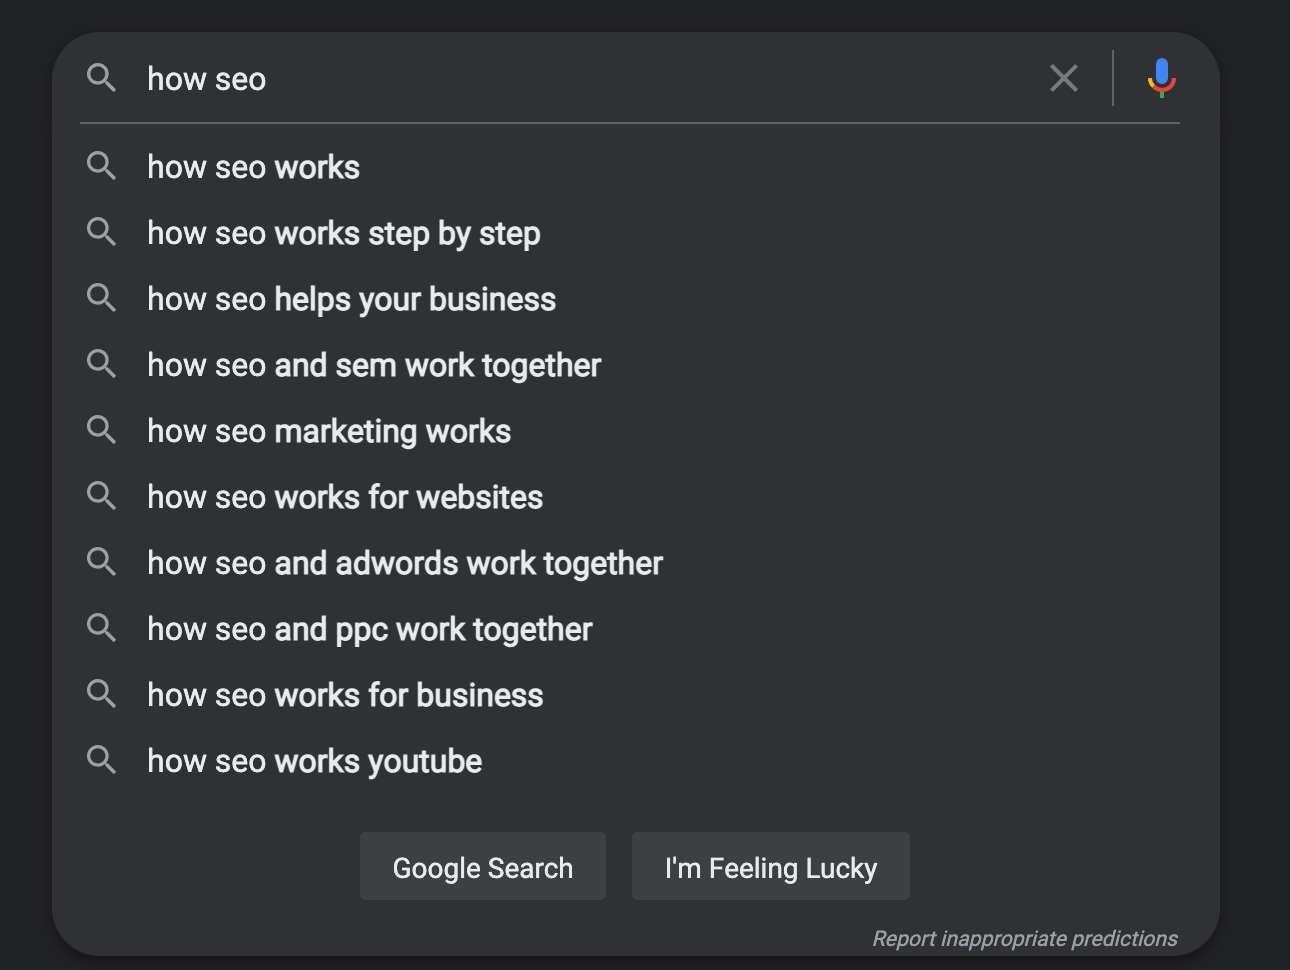 a screenshot of google with the search "how SEO." the suggested searches include "how SEO works step by step," "how SEO helps your business," "how SEO and SEM works together," and "how SEO and PPC work together."